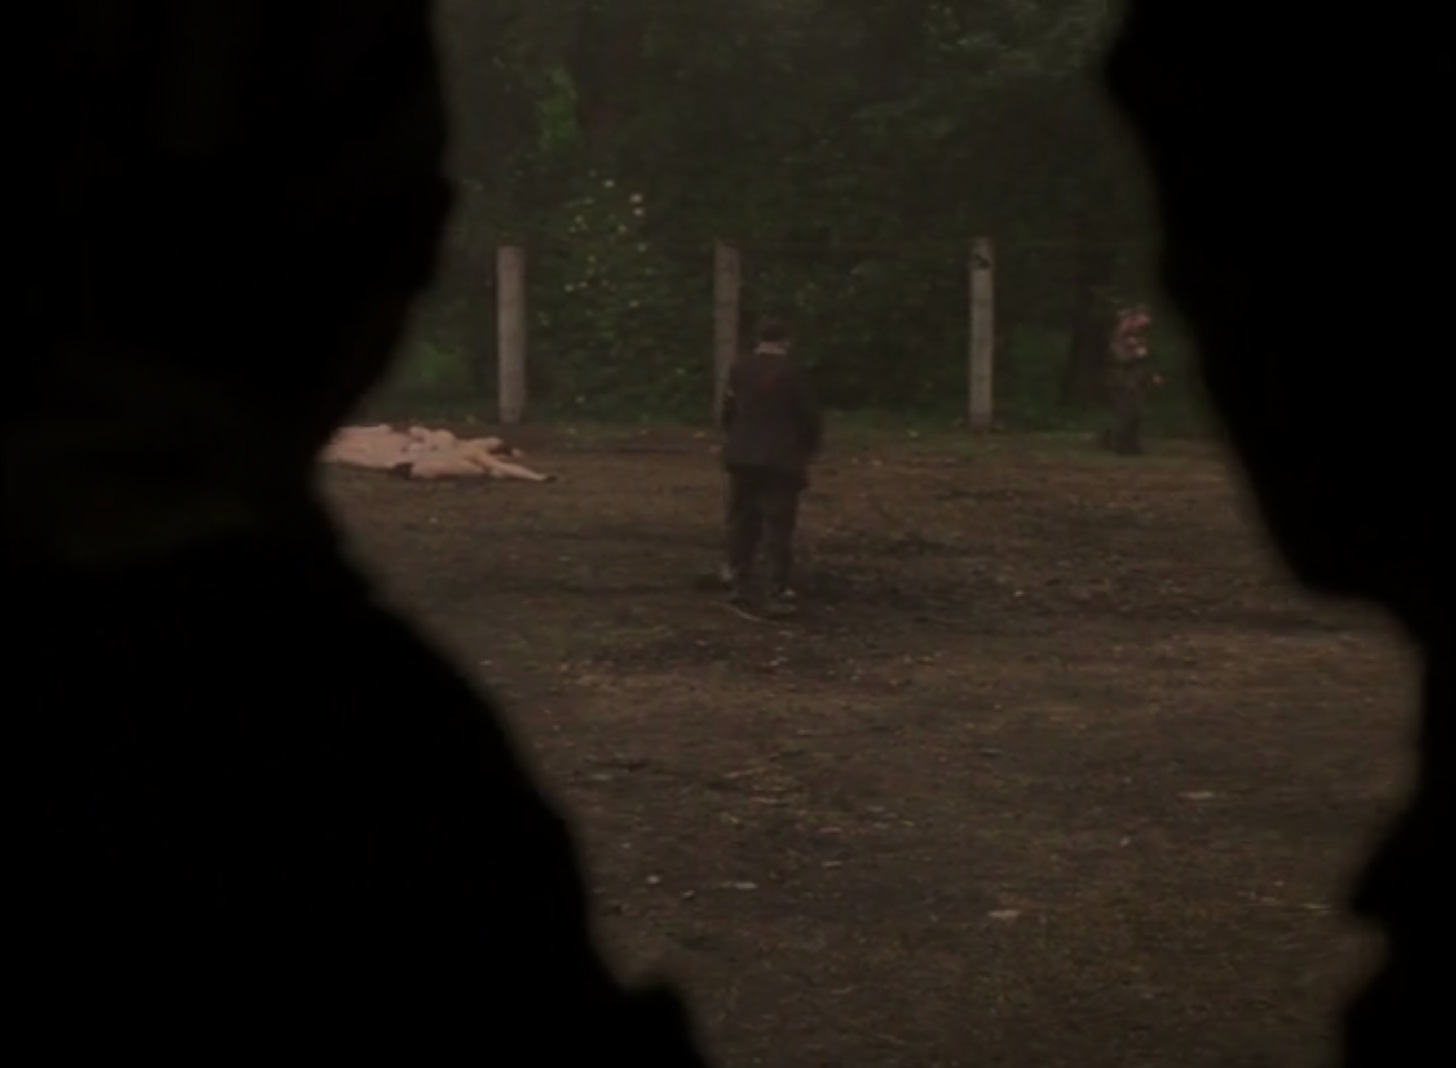 Fig. 1: Son of Saul creates new depths of field with its blurred staging of atrocities, such as in this scene where silhouetted members of the Sonderkommando surreptitiously try to take photos documenting these crimes.